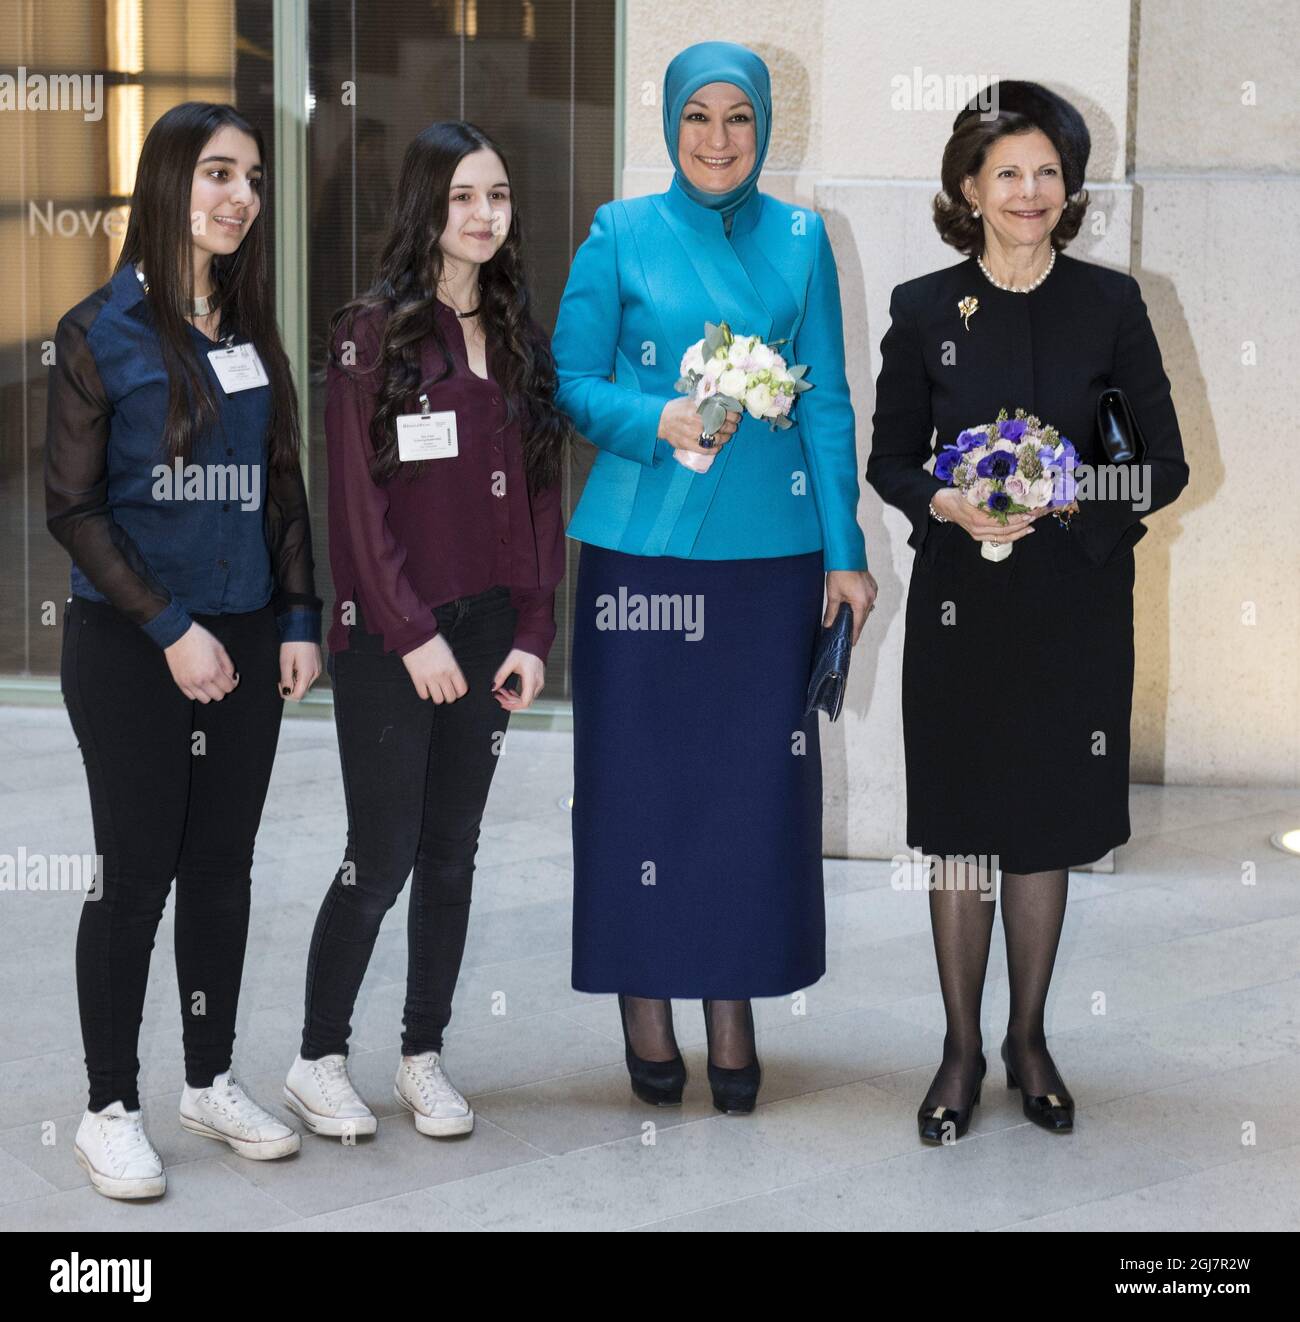 Sweden's Queen Silvia, right, Turkey's First Lady Hayrunnisa Gul, 2nd right, are welcomed with flowres by Dilan Karakus, left, and Nur Eren, 2nd left, from the Rinkeby Acedemy, as they arrive for a lecture at Ernest & Young n Stockholm.The Turkish presidential couple is in Sweden for a trhee-day official state visit.      Stock Photo